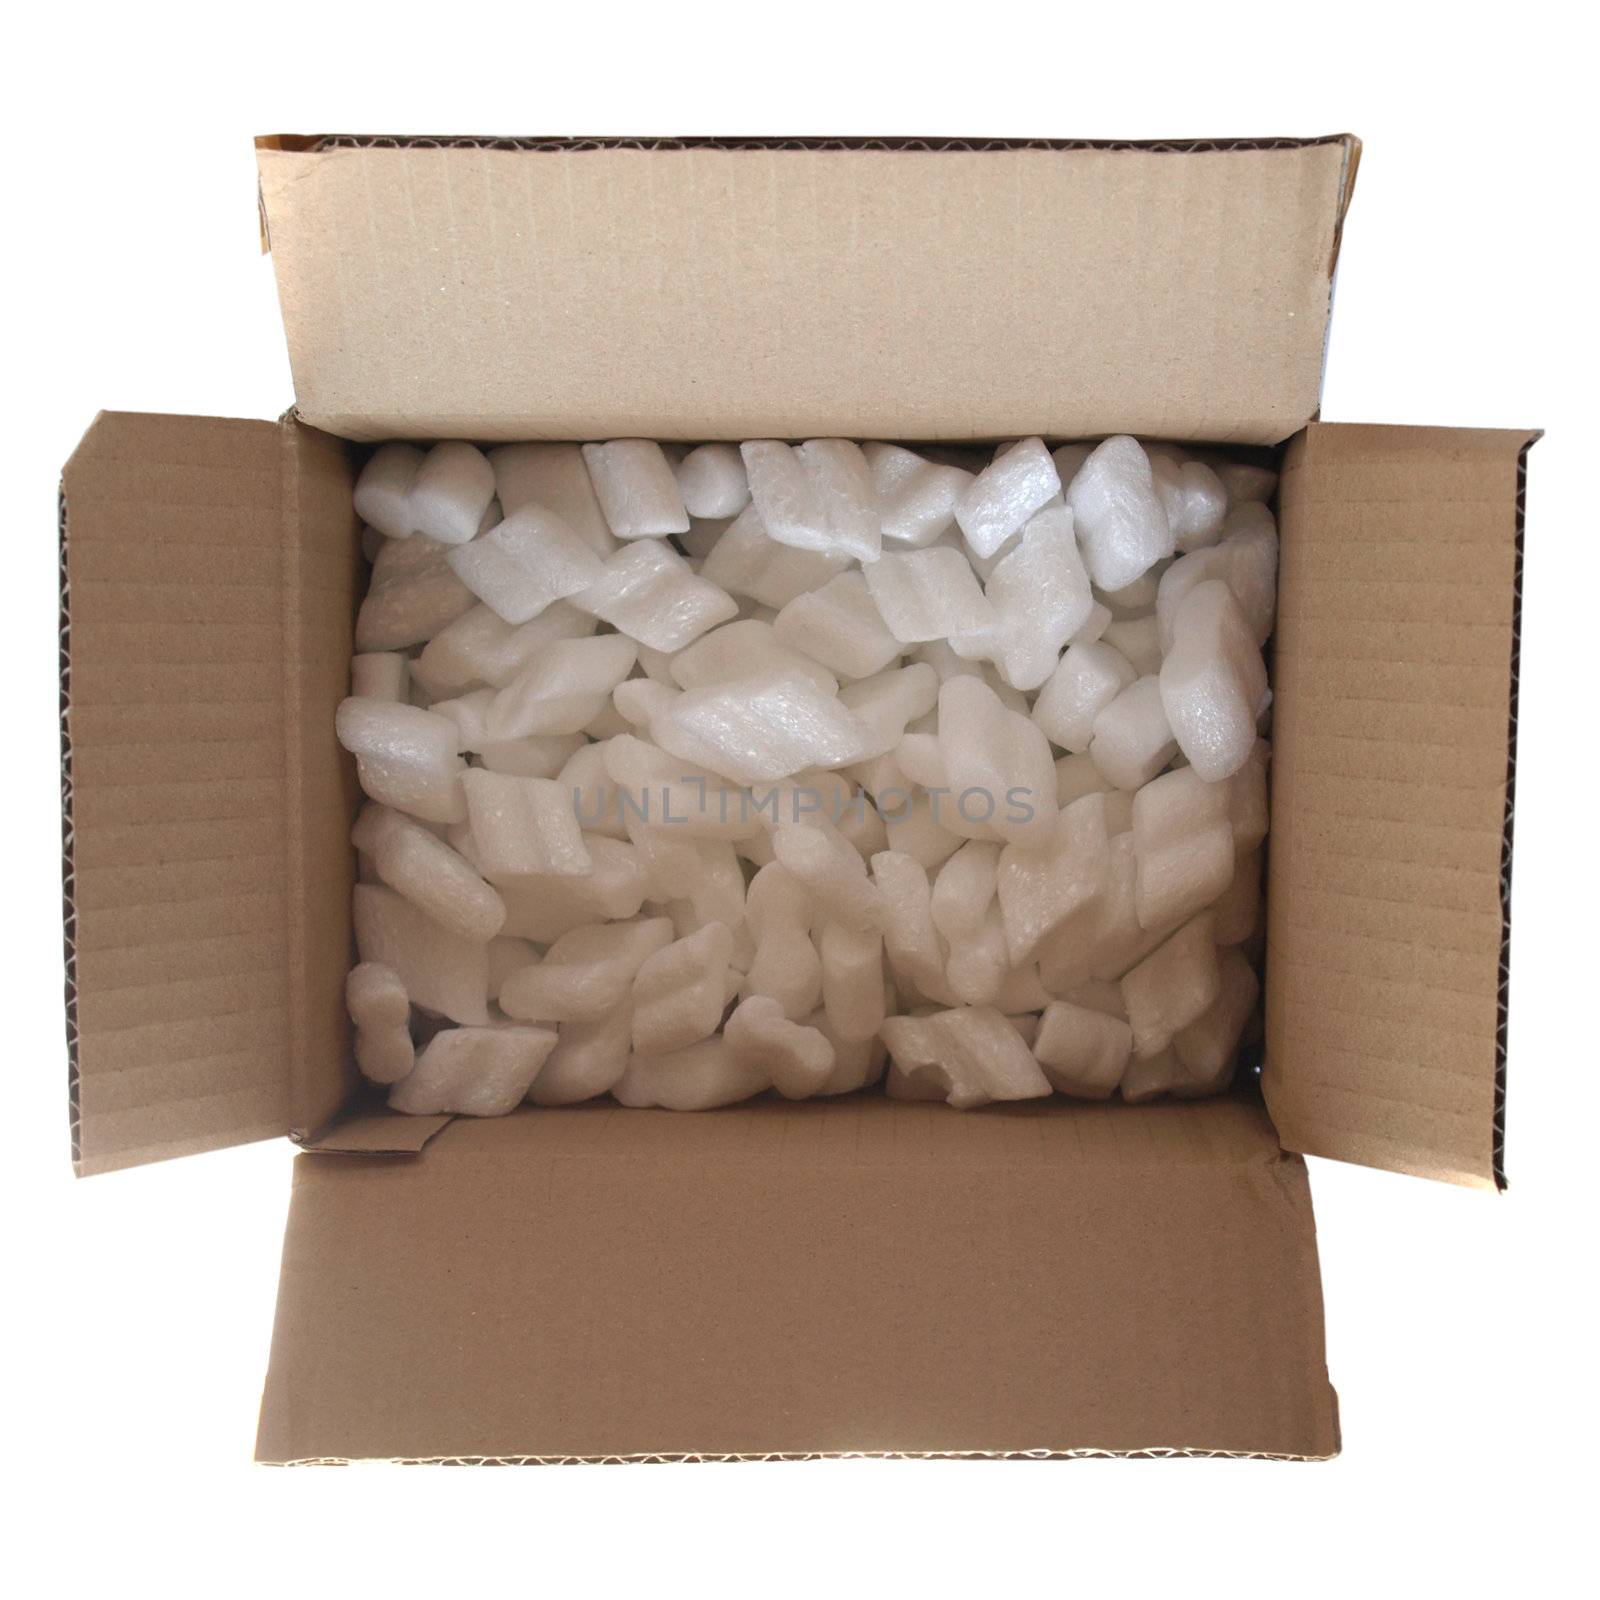 Parcel or packet with expanded polystyrene insulating fill